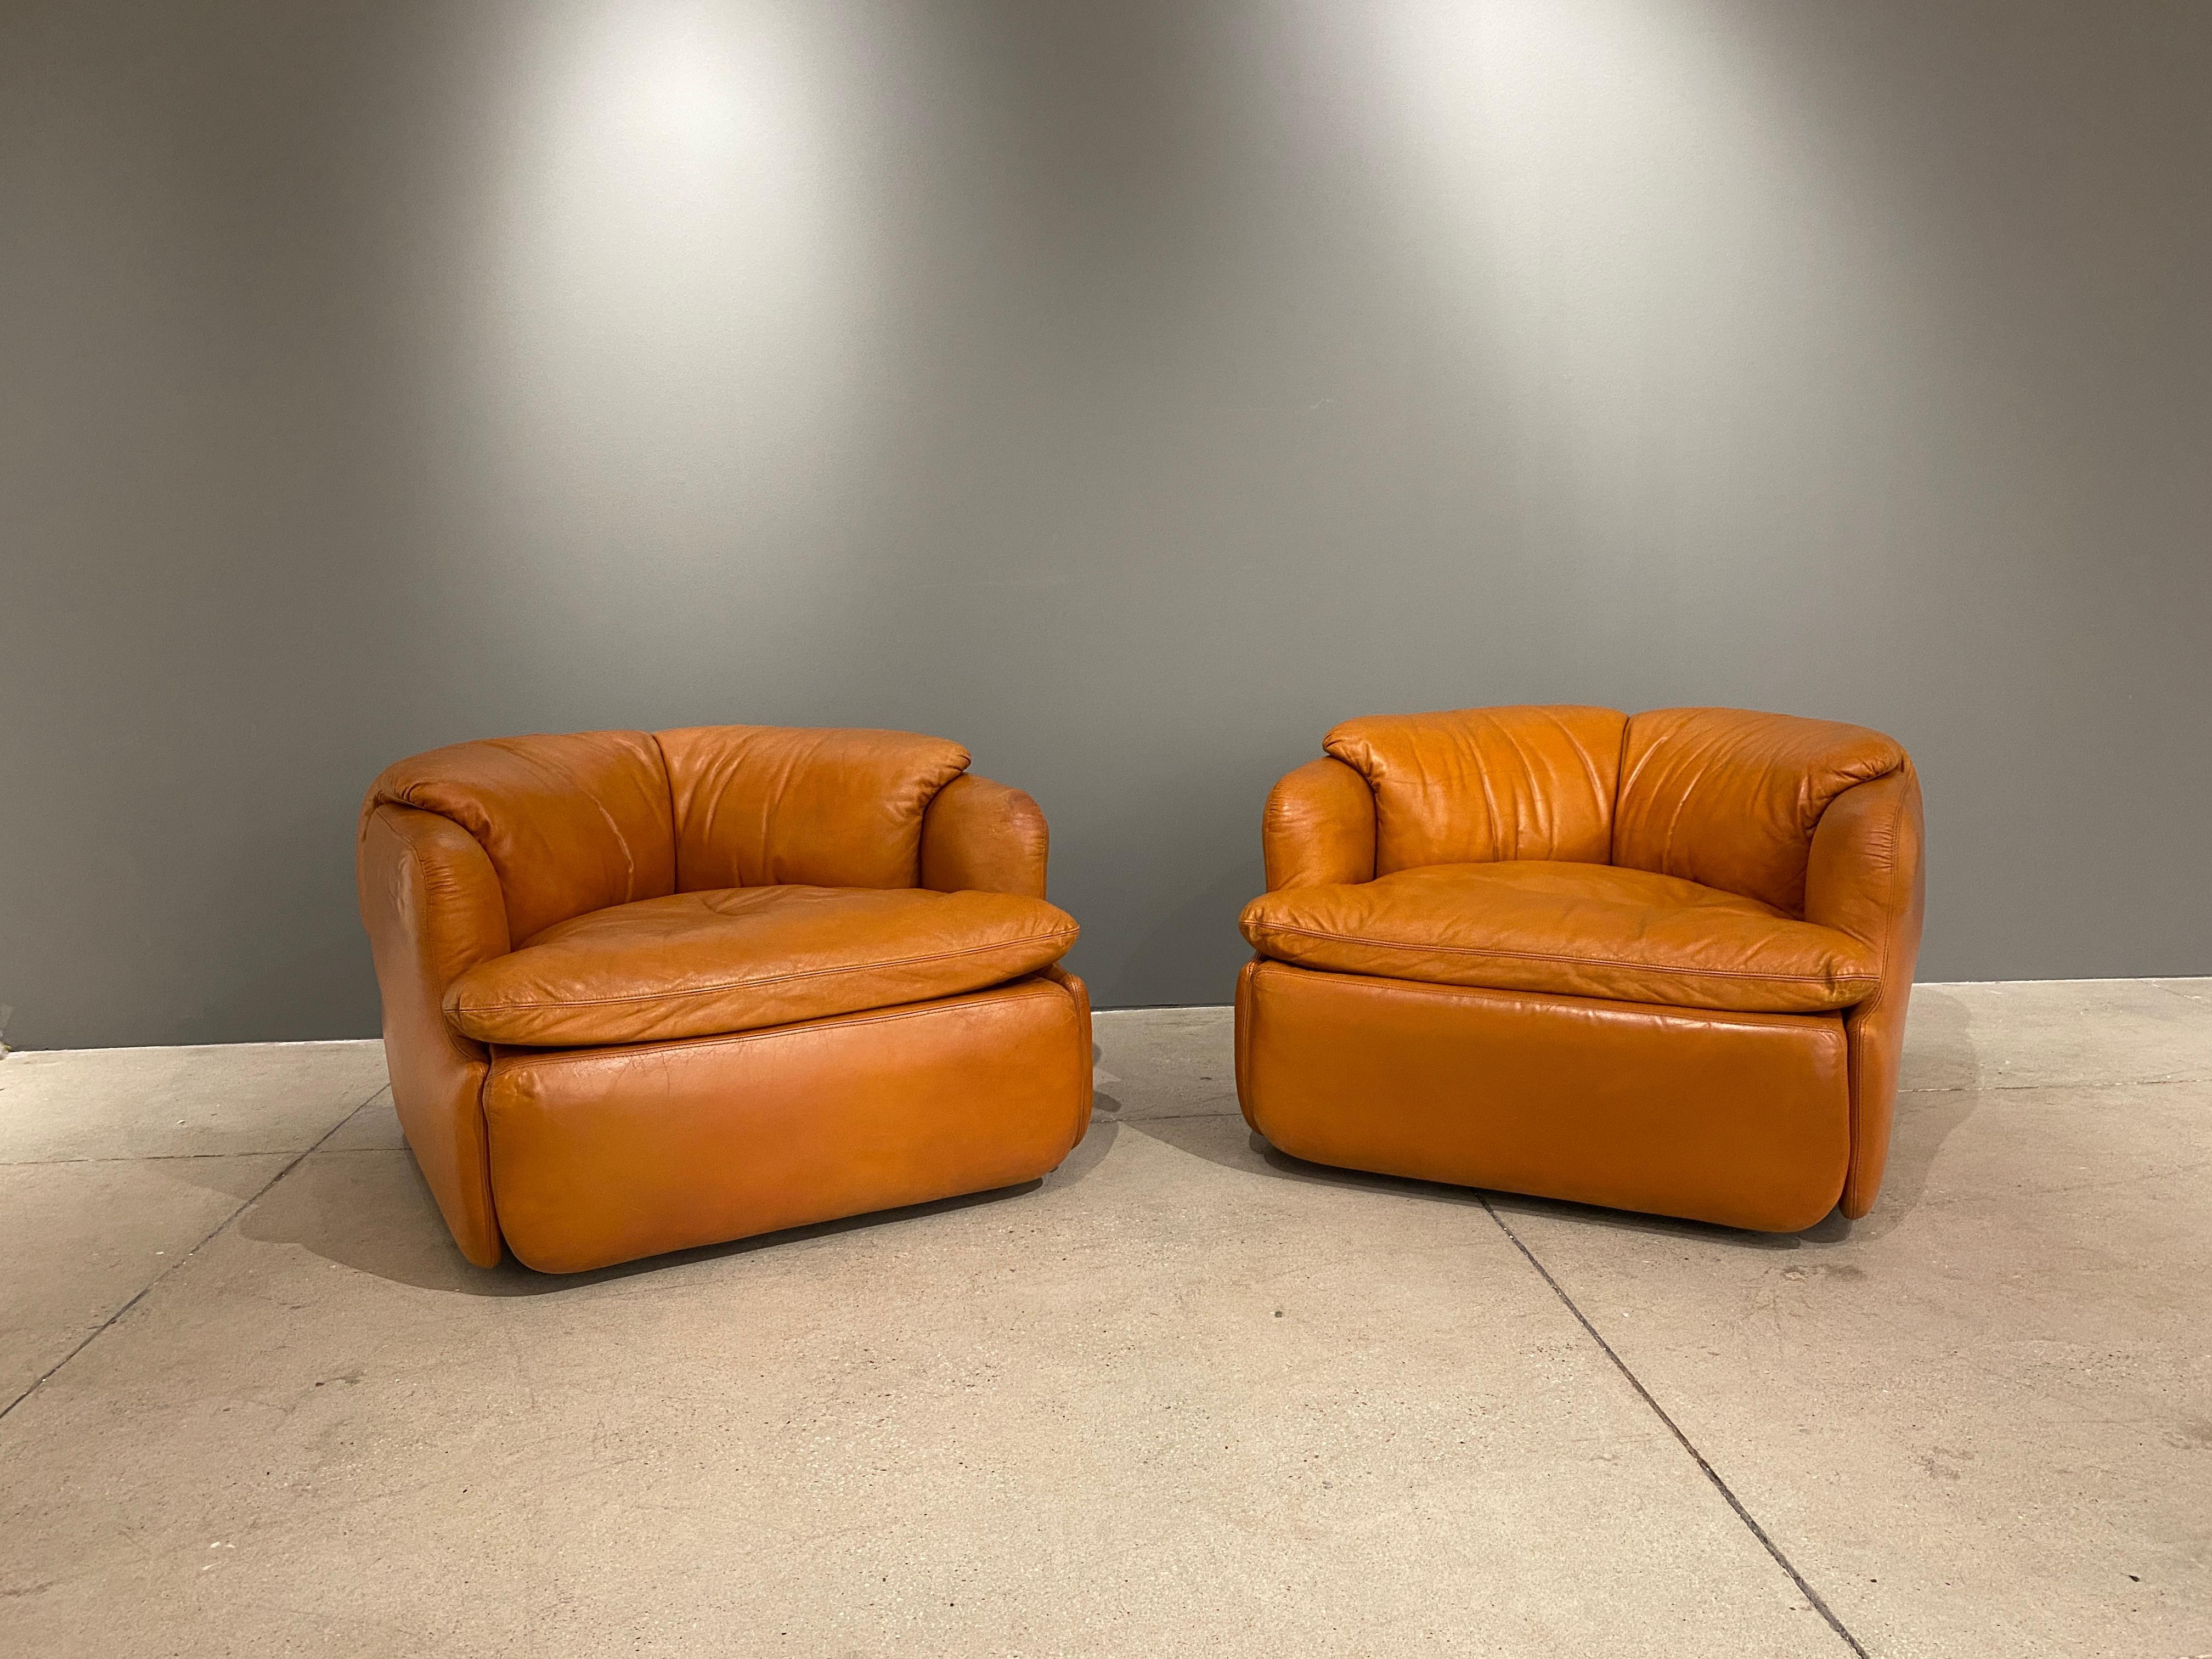 A pair of armchairs in leather designed by the Alberto Rosselli. These chairs are so inviting, so comfortable and in great shape. The unique design of the cushions which nestle in the frame make it a work of art. The leather is in good shape with a